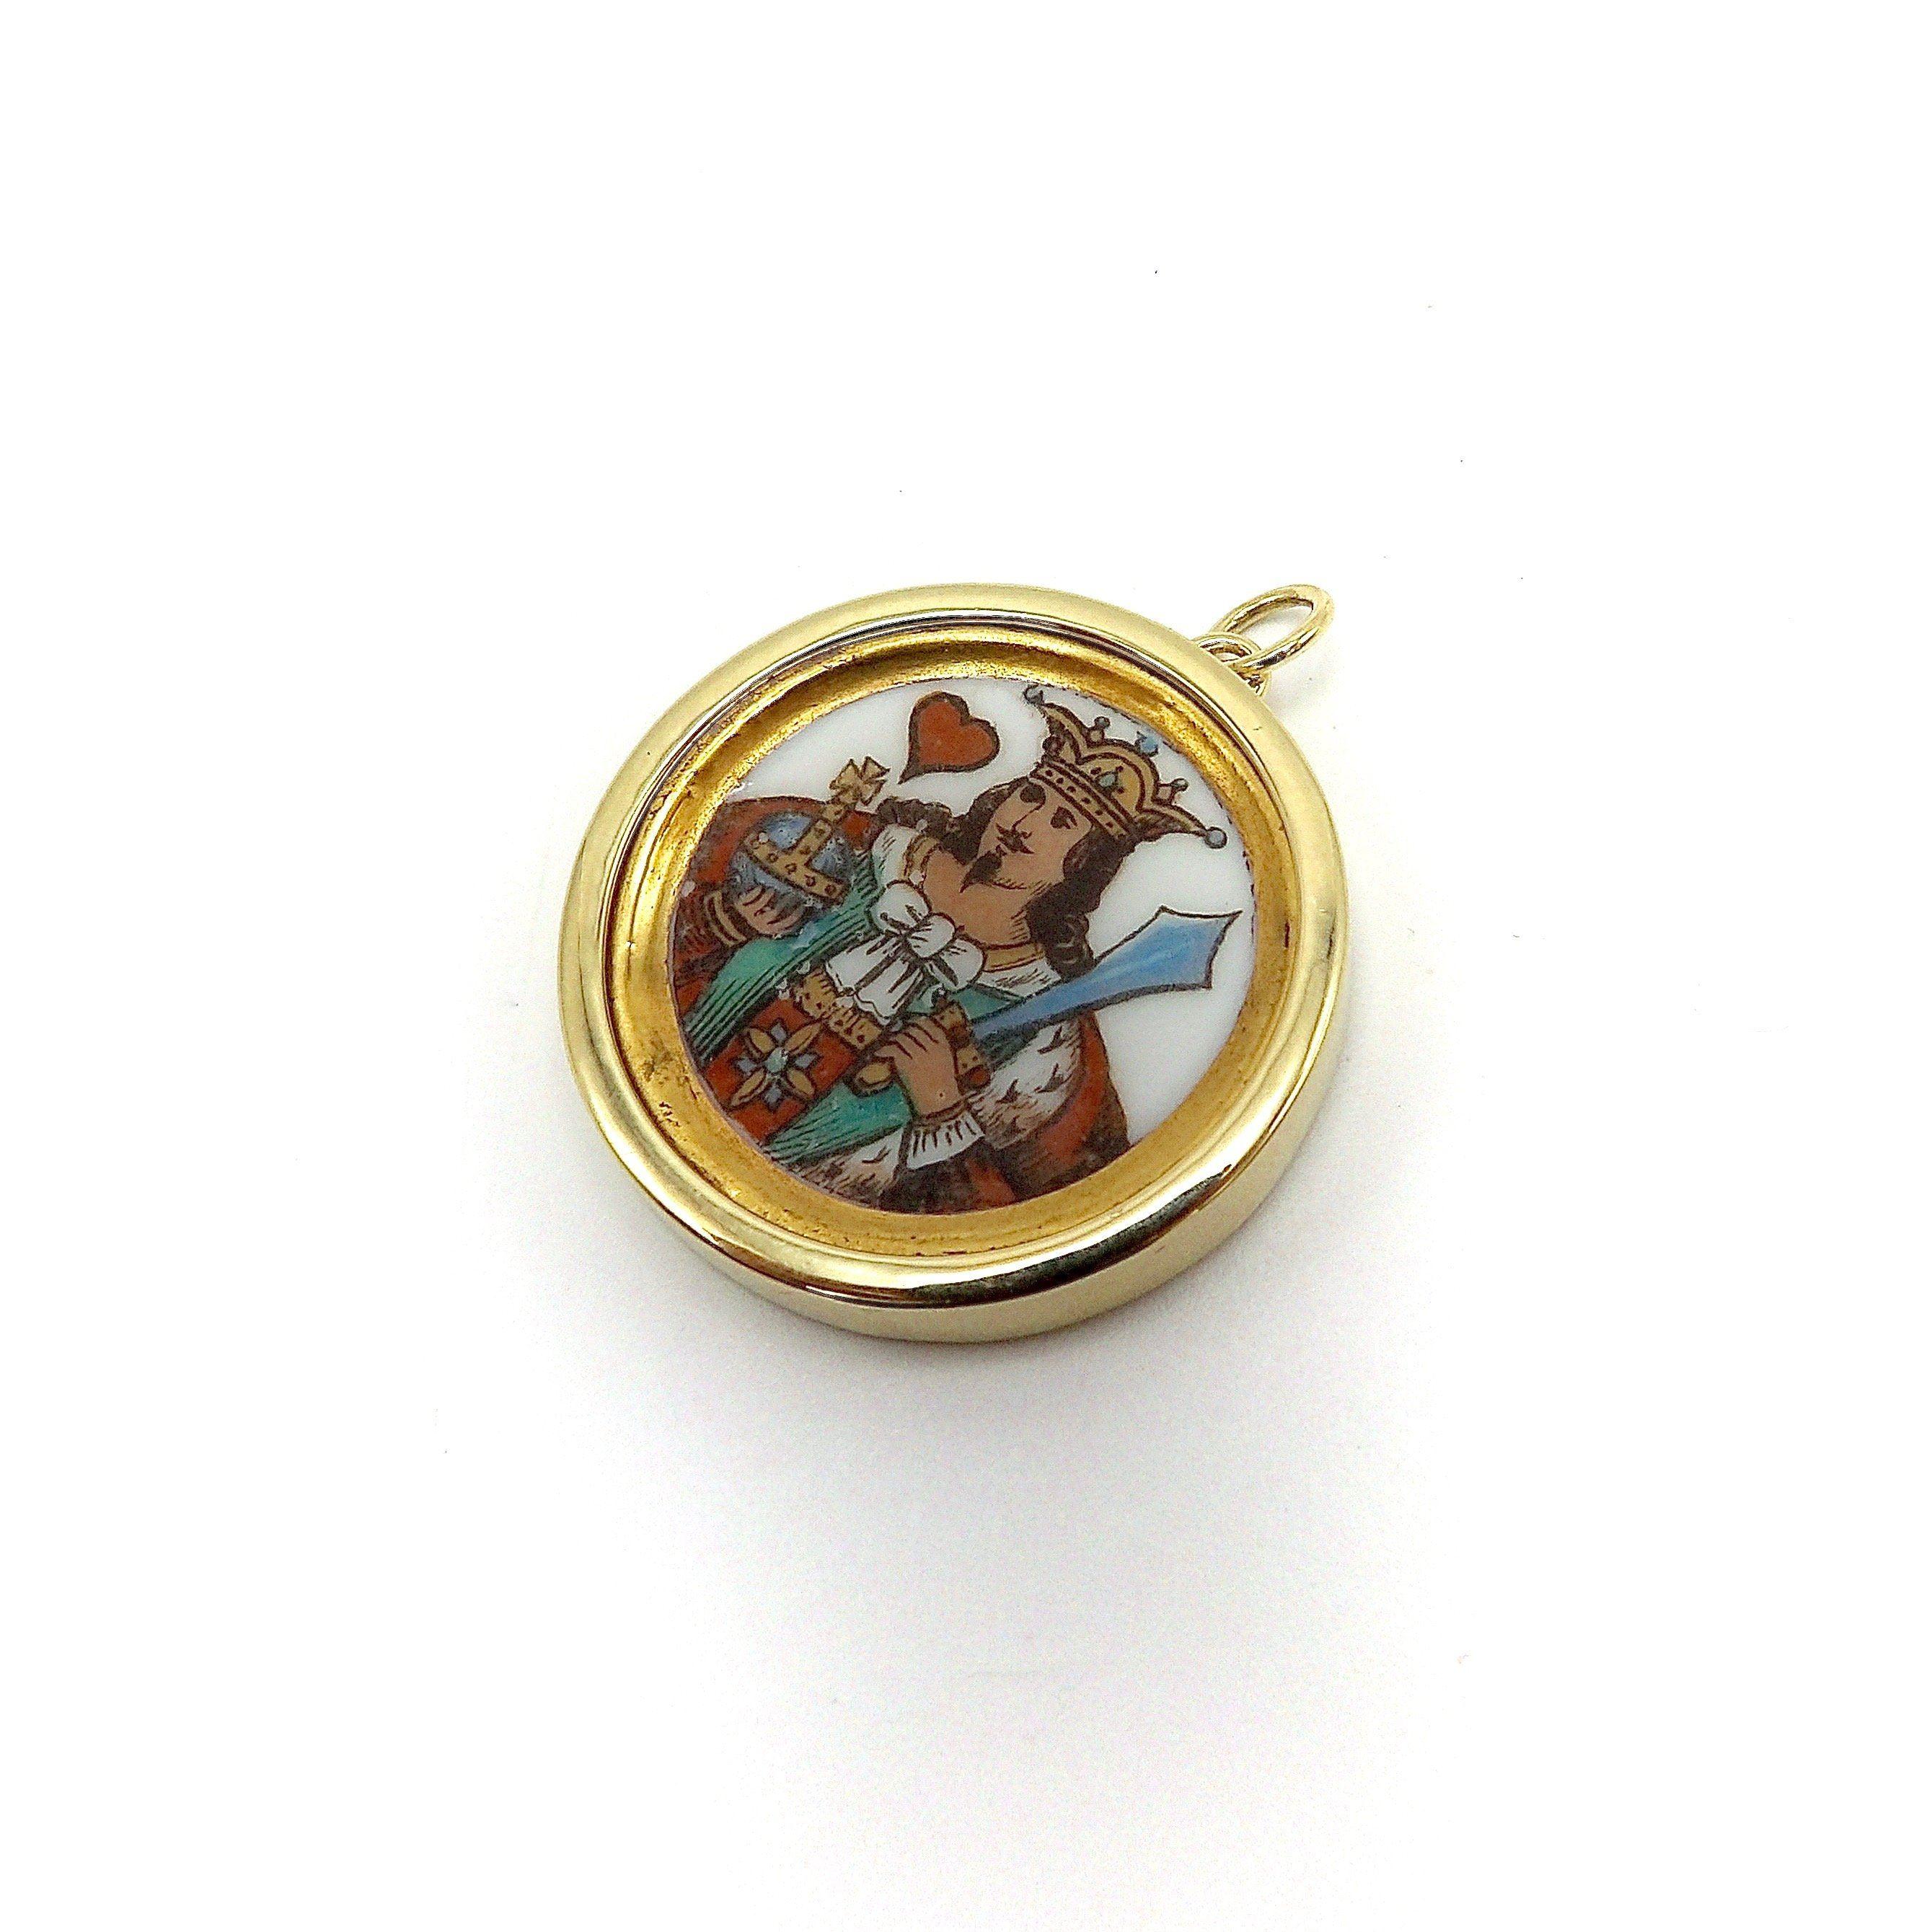 14k Gold Victorian Era King of Hearts Whist Marker Pendant

This Kirsten’s Corner signature, Victorian era, Whist game marker piece has a 14k bezel setting around it. Each bezel setting is carefully handcrafted surrounding the porcelain whist